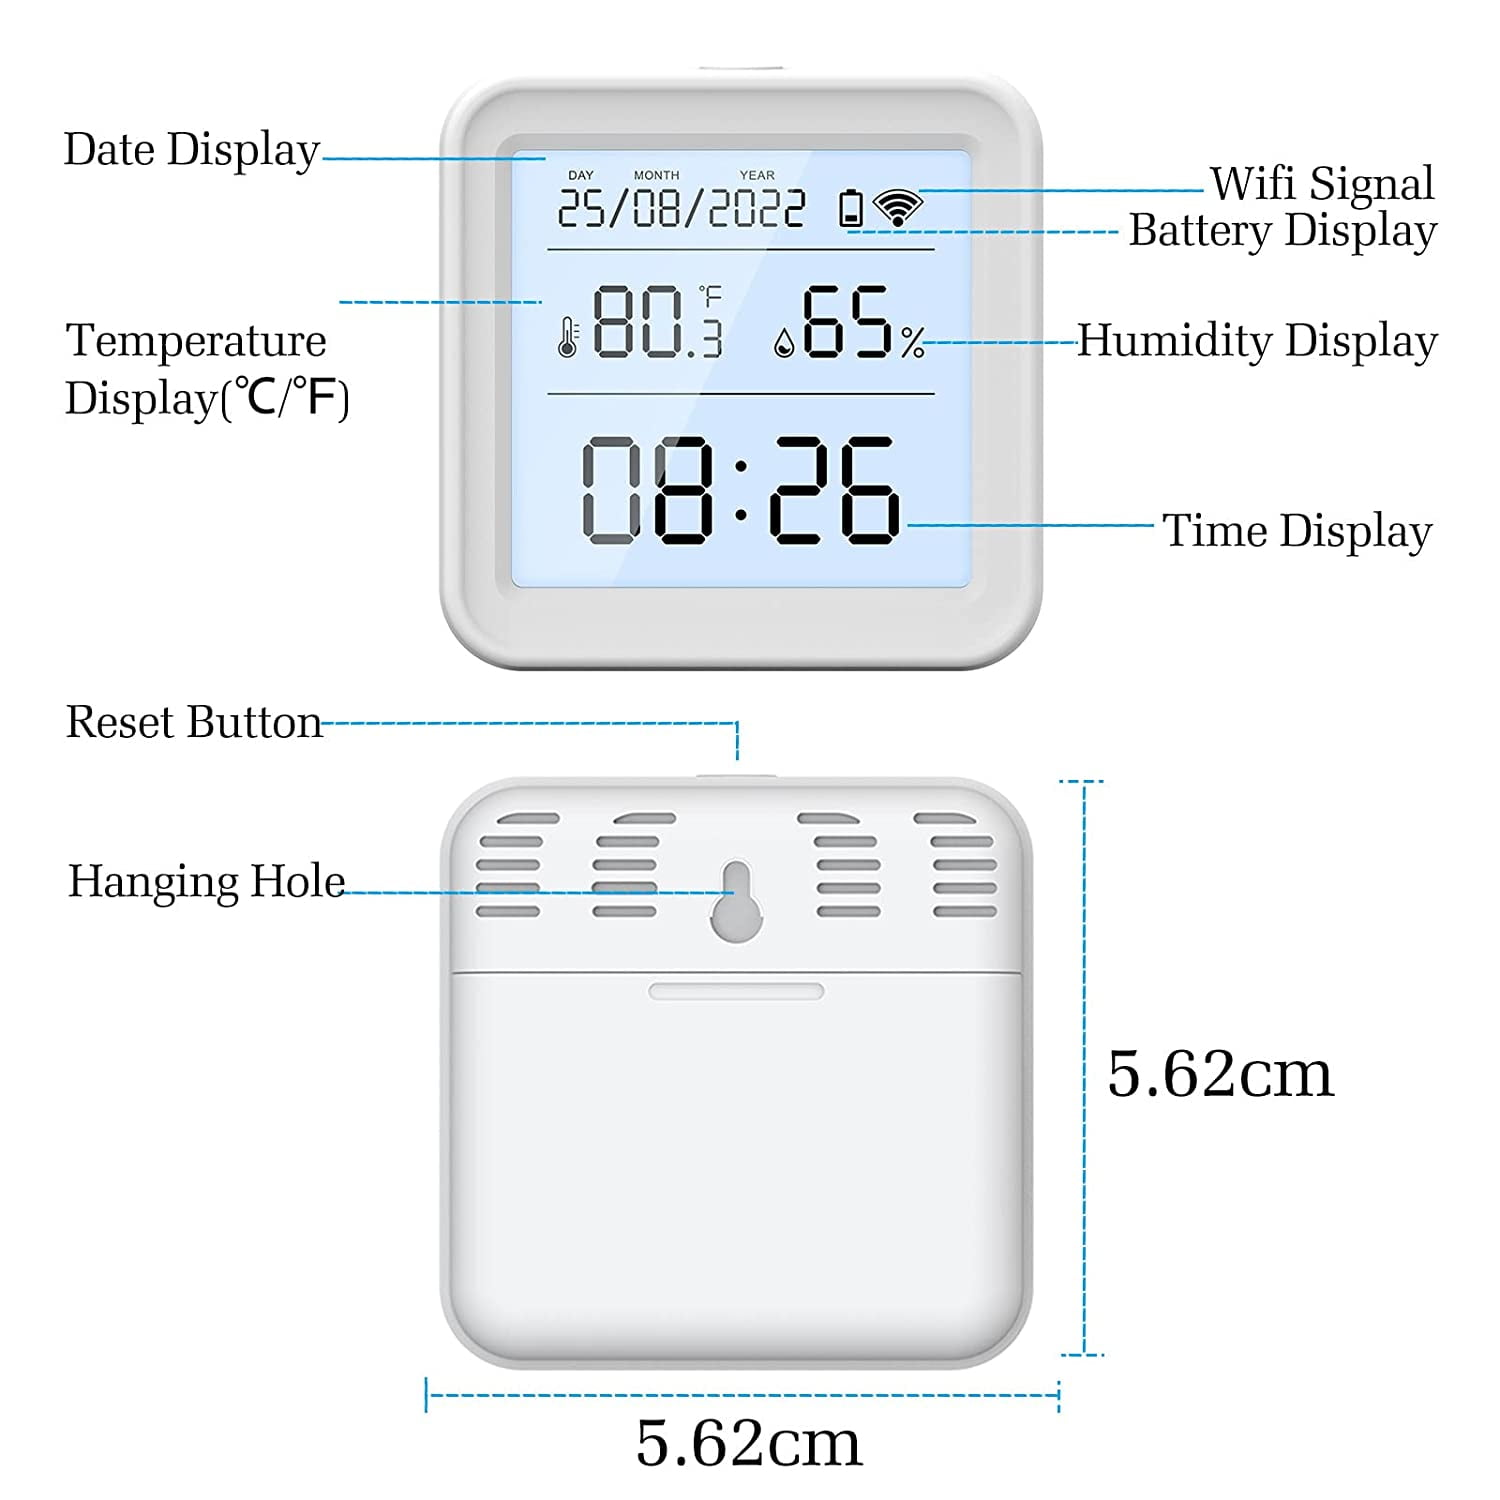 eMylo WiFi Thermometer Hygrometer, WiFi Temperature Humidity Monitor with  App Notification Alert, History Data, Compatible with Alexa Google